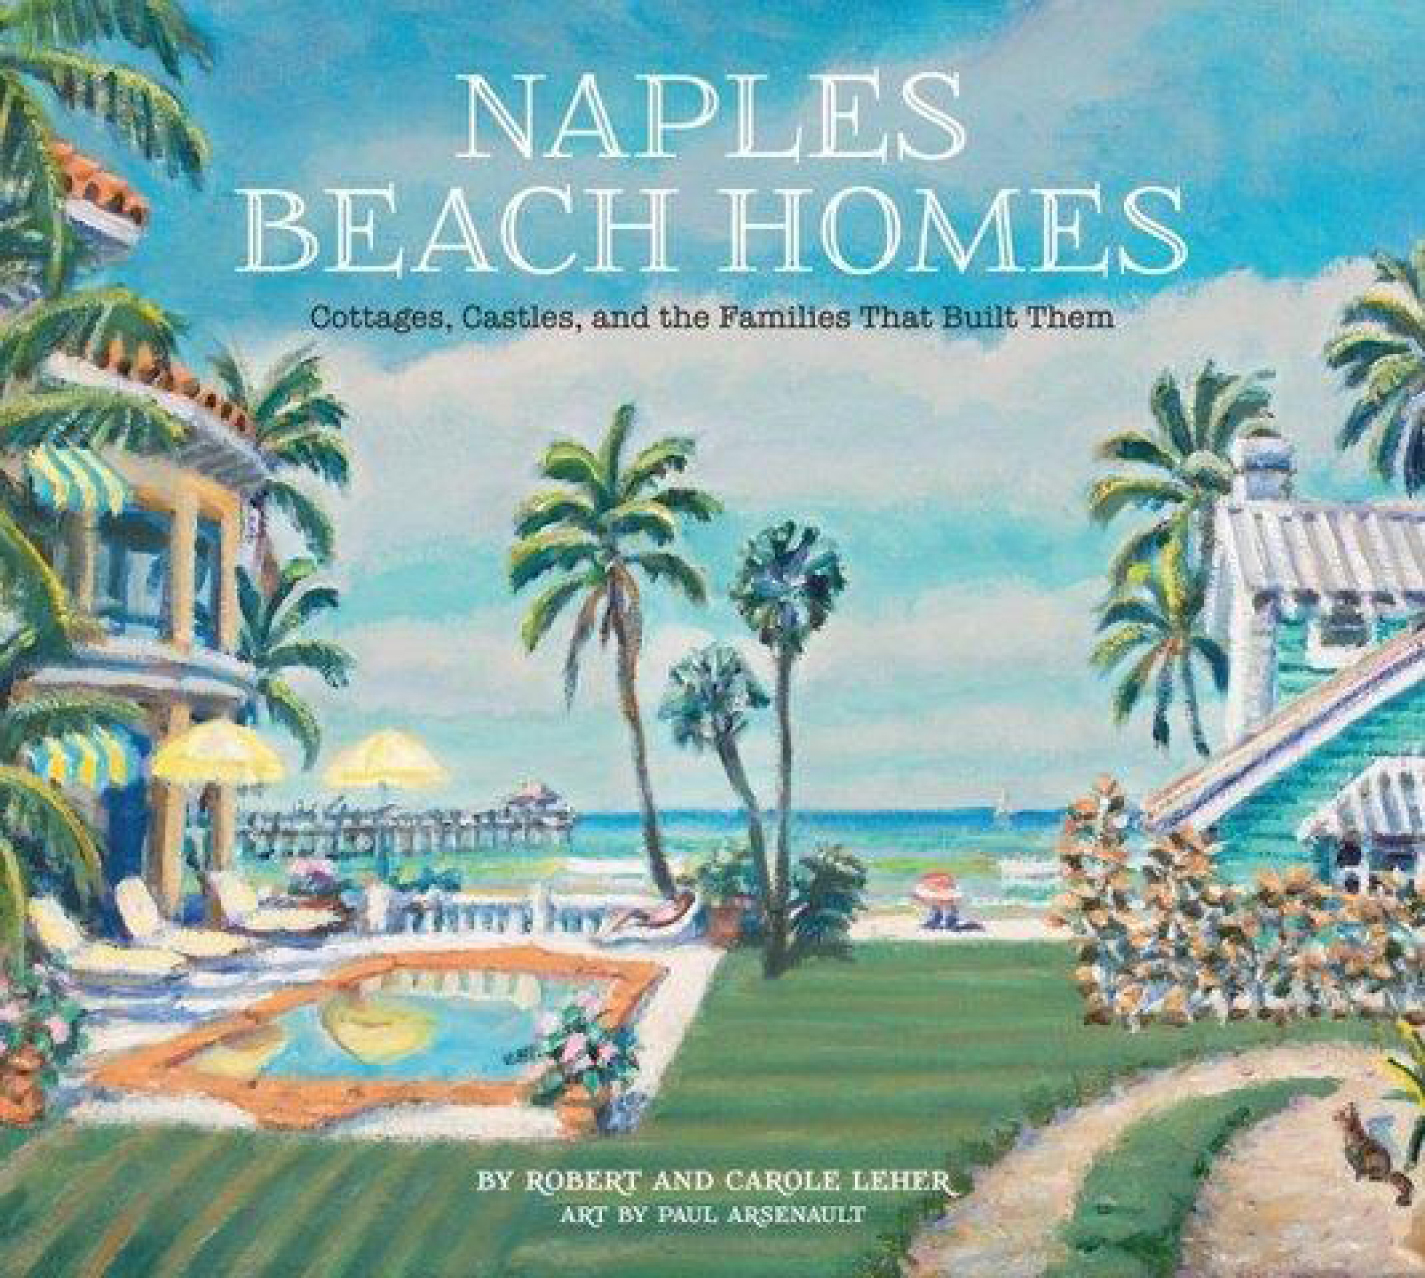 “Naples Beach Homes: Cottages, Castles, and the Families that Built Them”